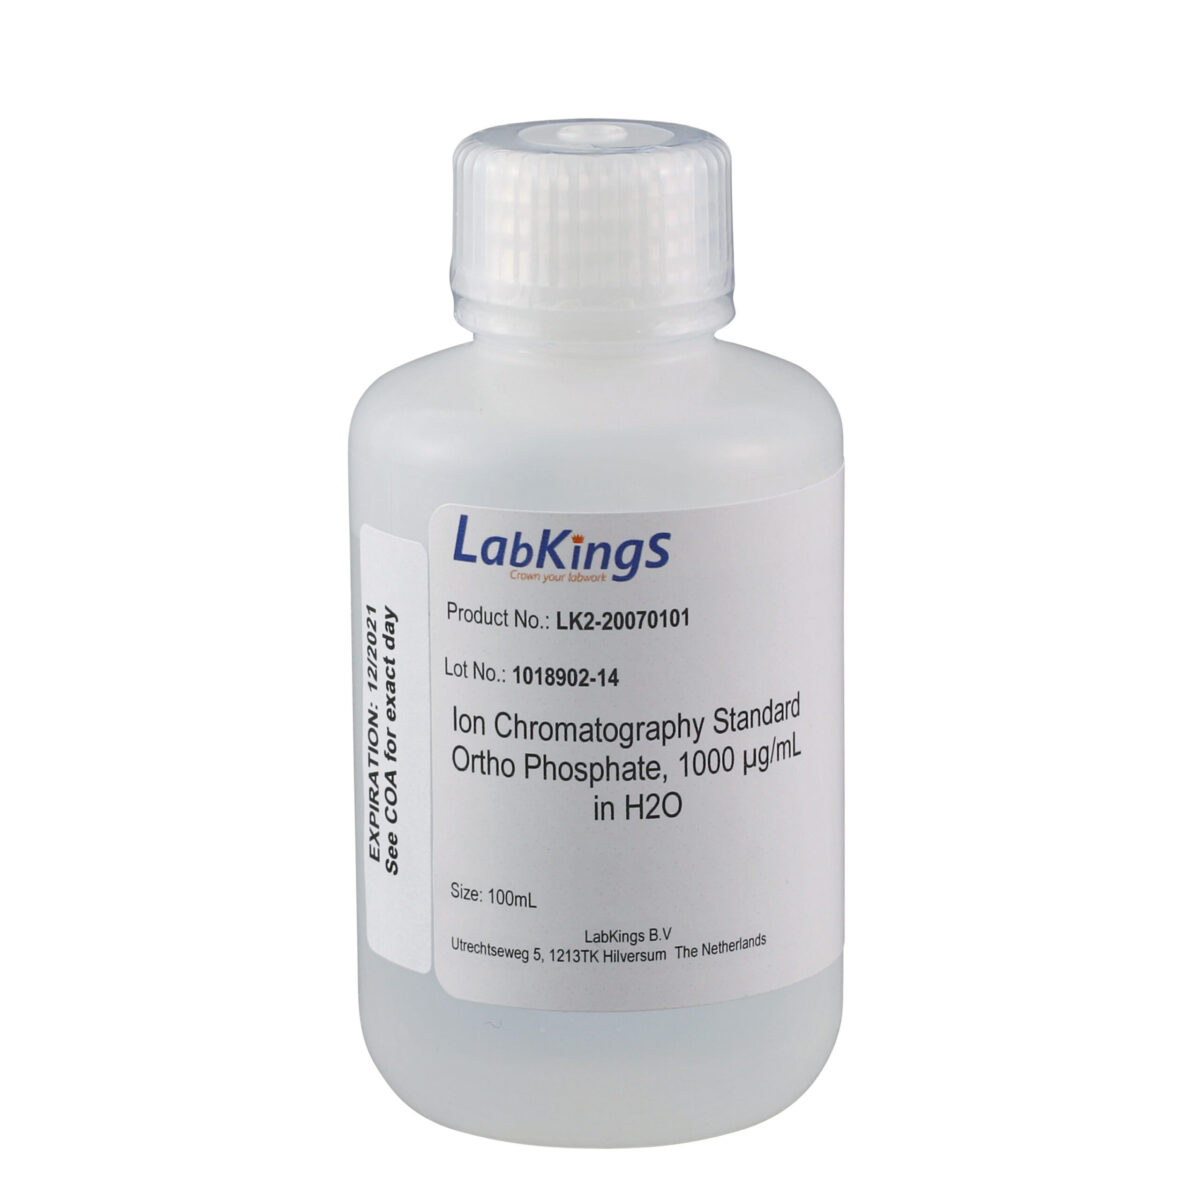 Ortho Phosphate, 1000 mg/L, Ion Chromatography Standard, in H2O, 250mL